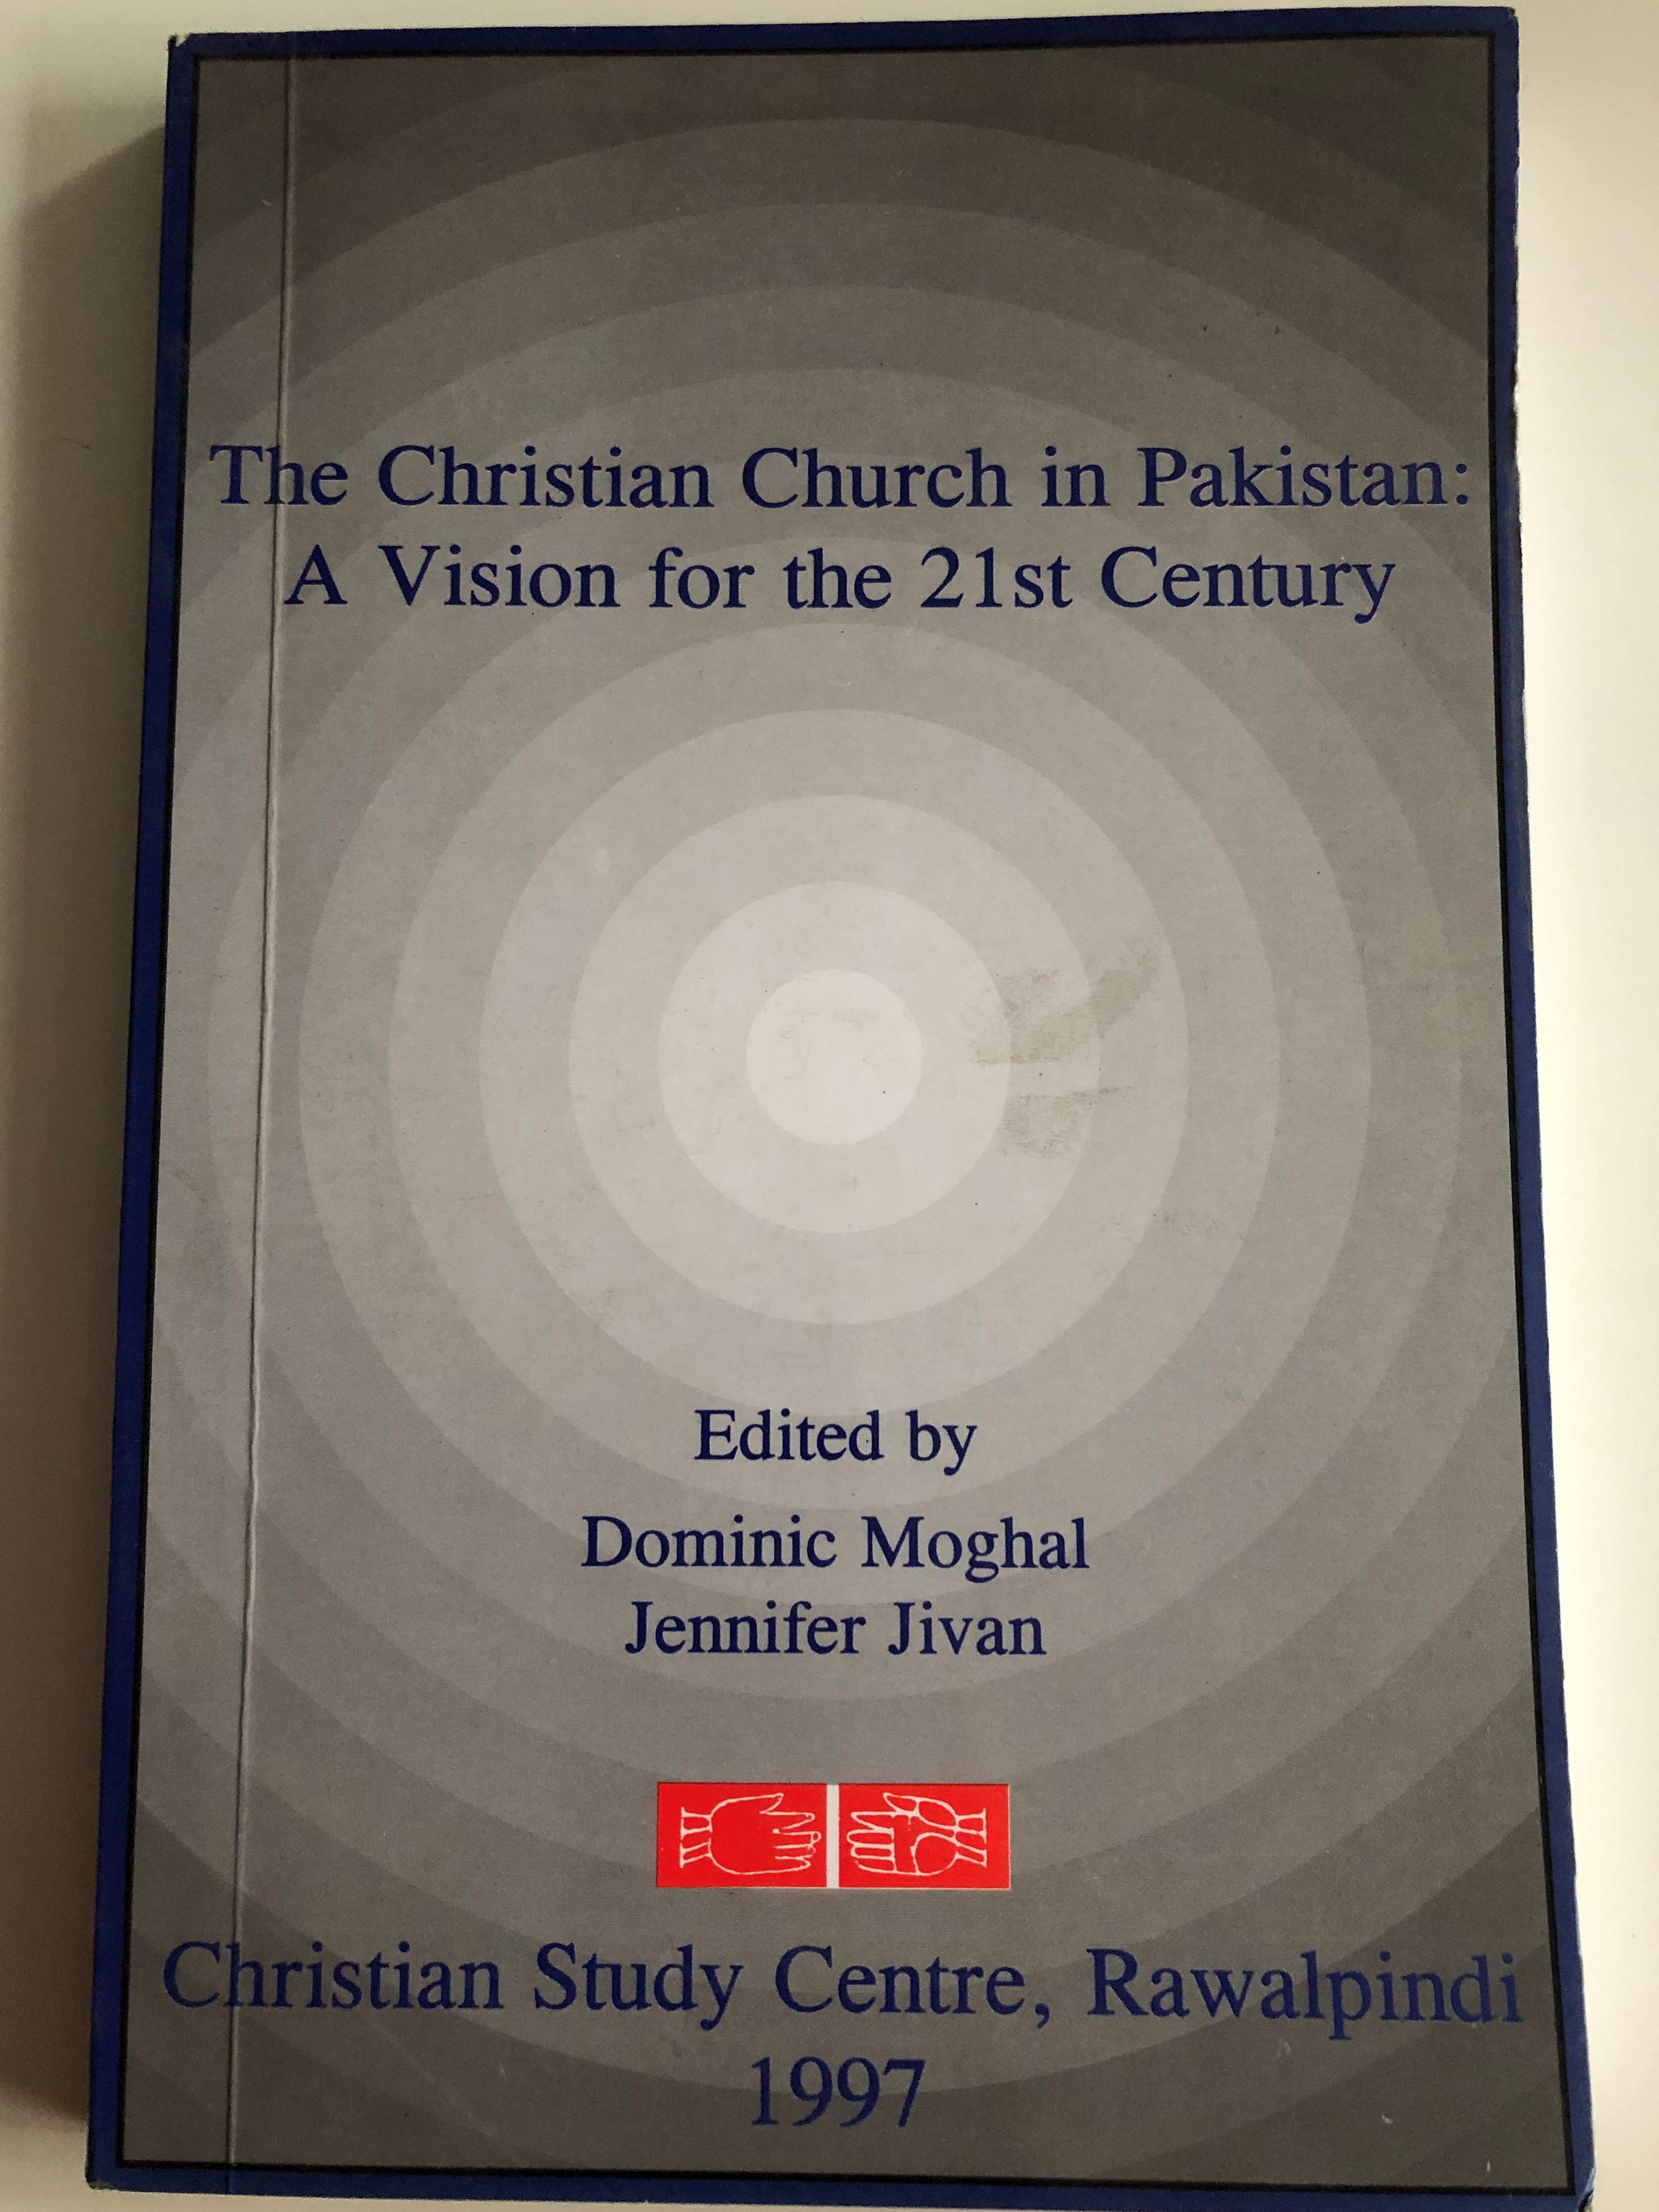 the-christian-church-in-pakistan-a-vision-for-the-21st-century-by-dominic-moghal-jennifer-jivan-1-.jpg